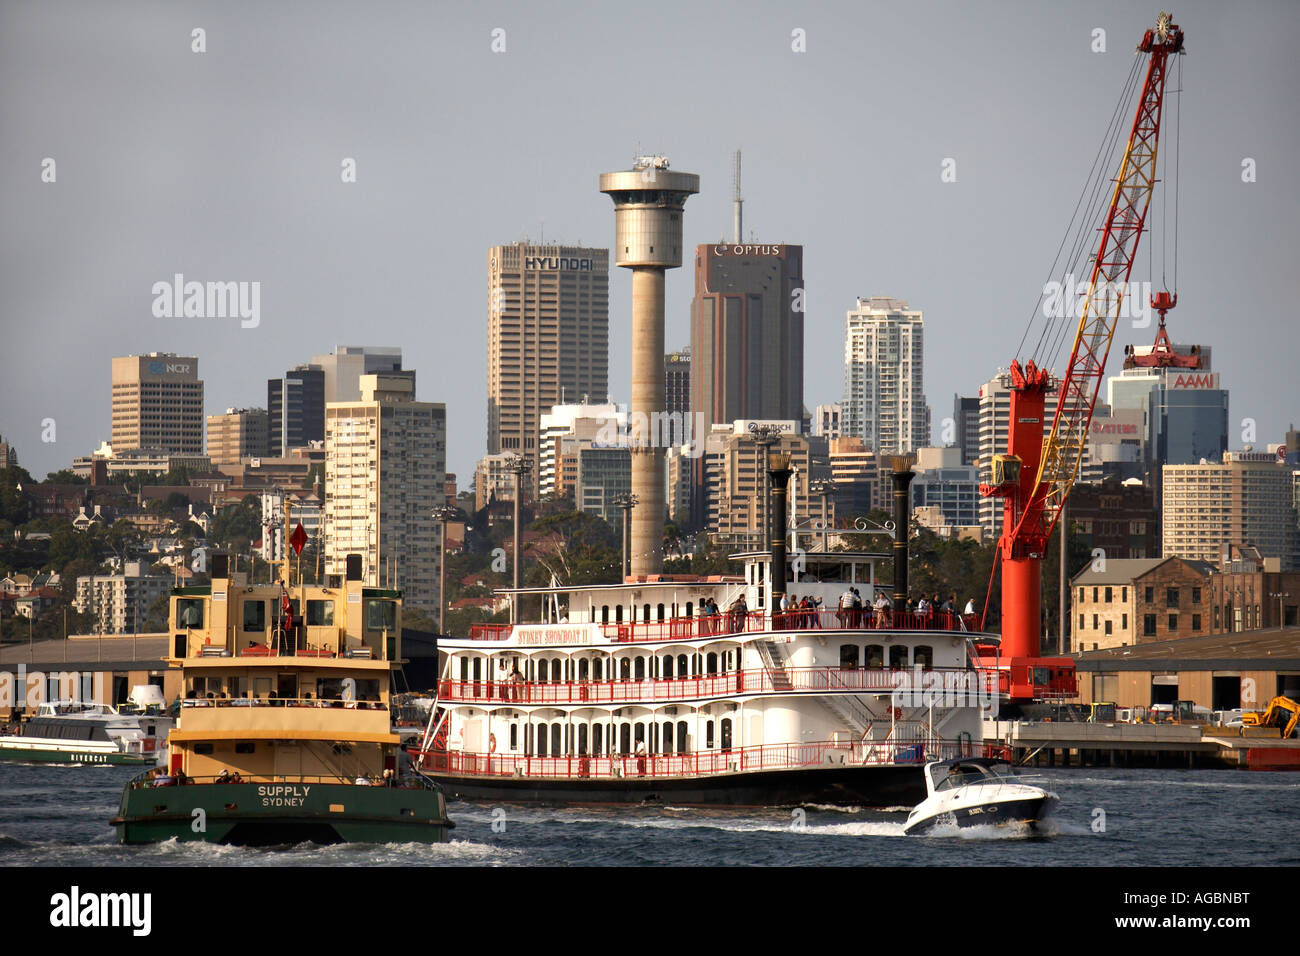 Ferry and paddle ship boat on Darling Harbour northern business district buildings skyline Sydney New South Wales NSW Australia Stock Photo